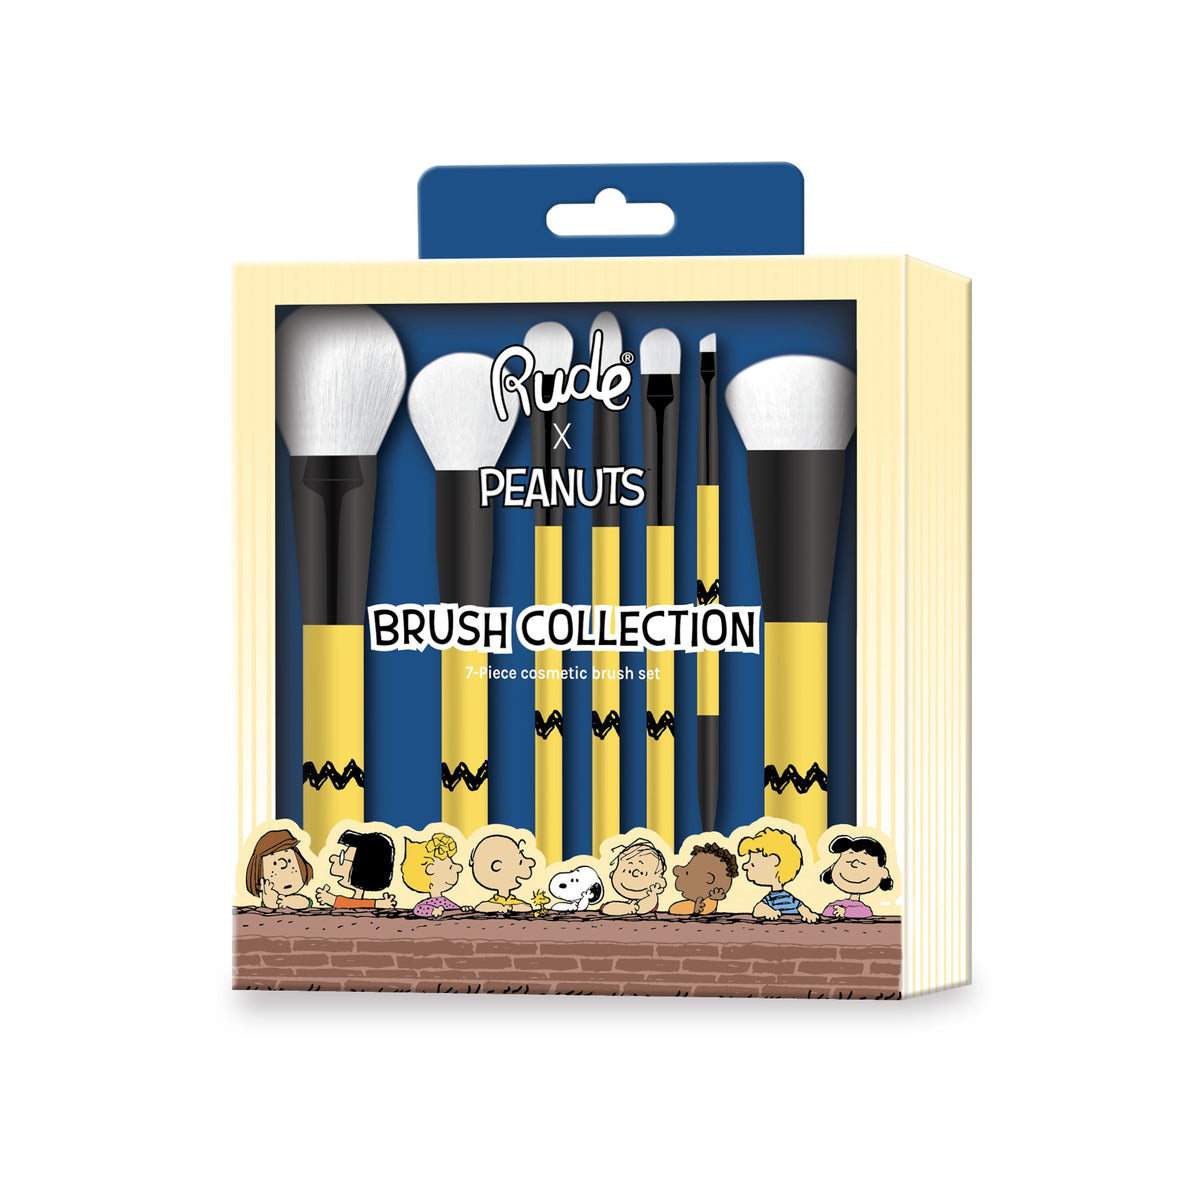 Peanuts Brush Collection